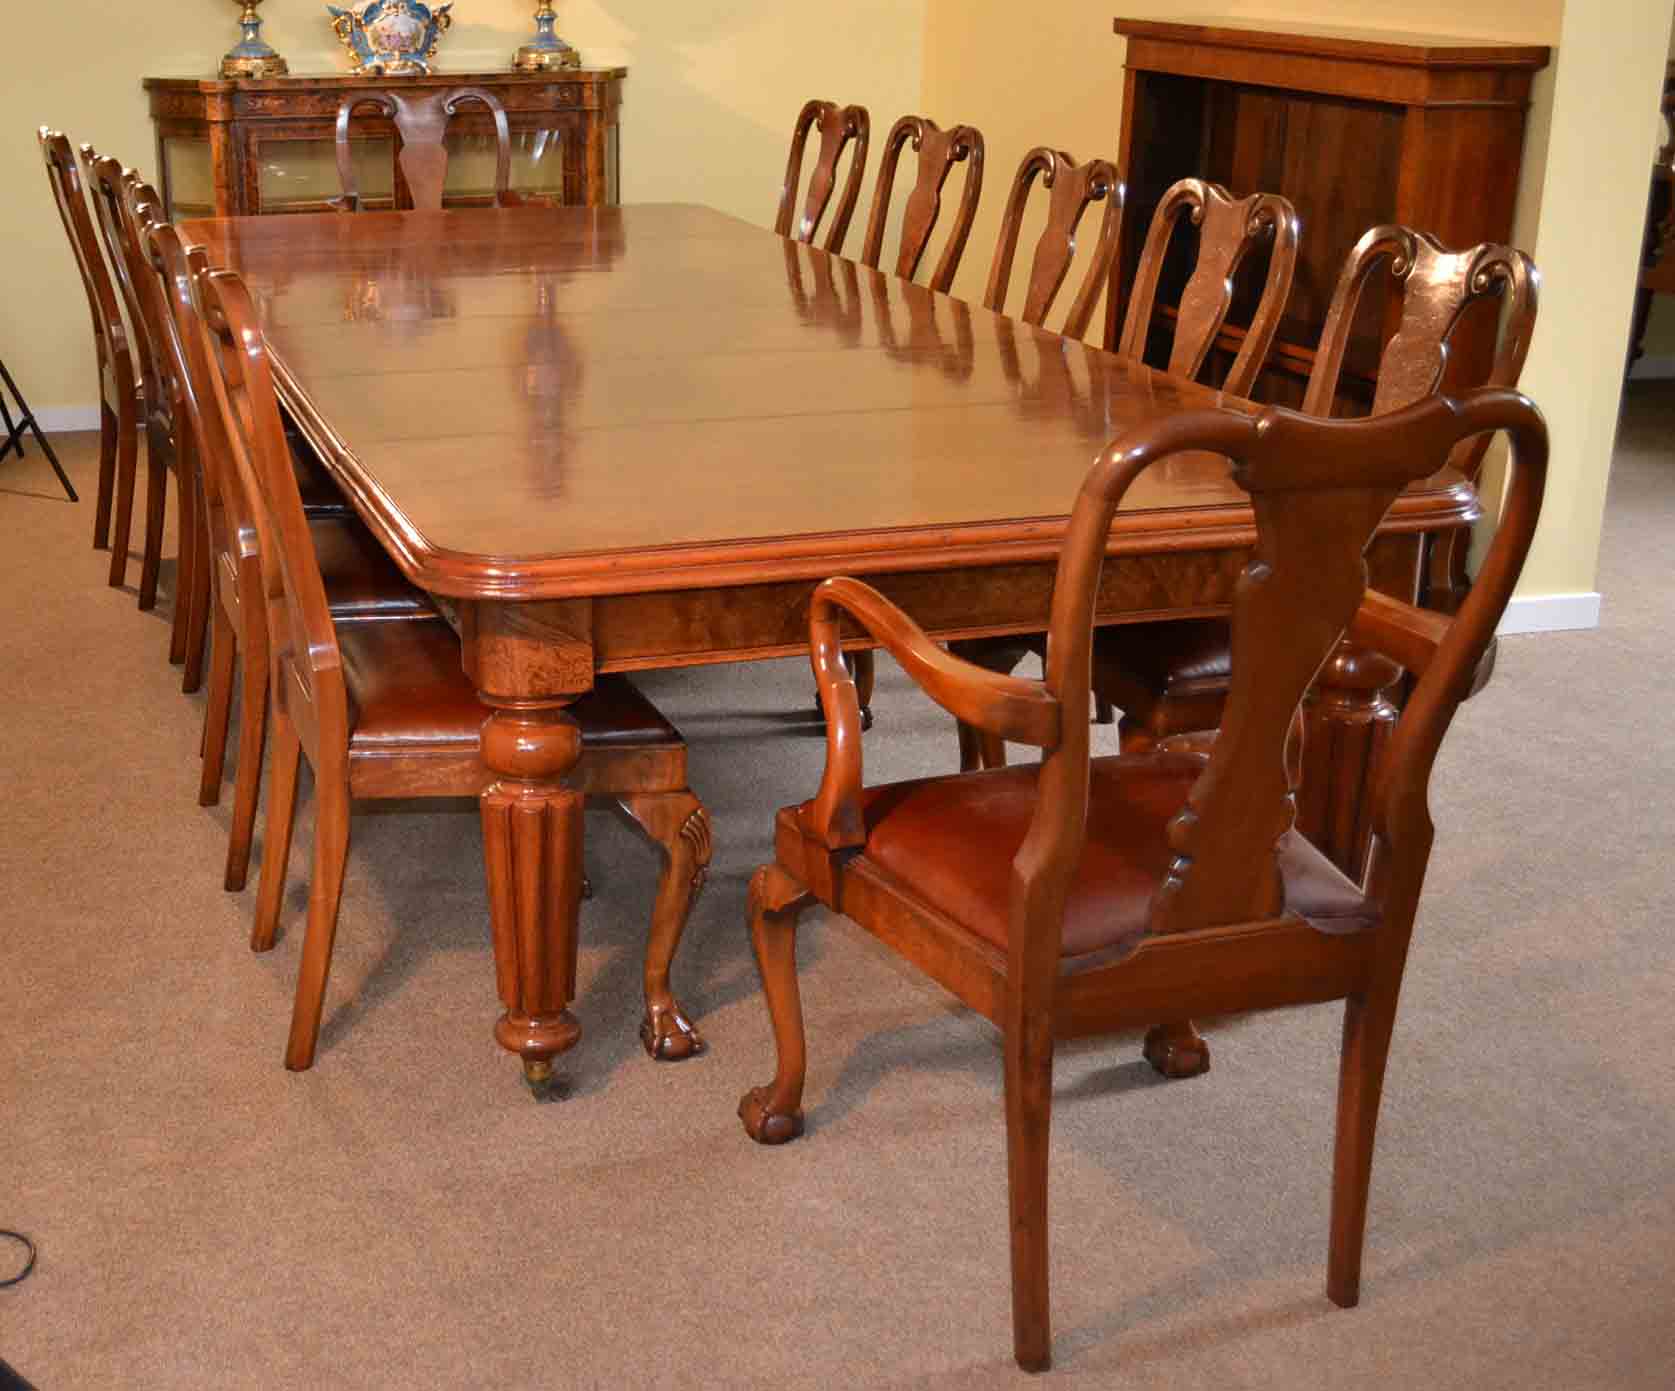 Vintage Dining Room Table And Chairs